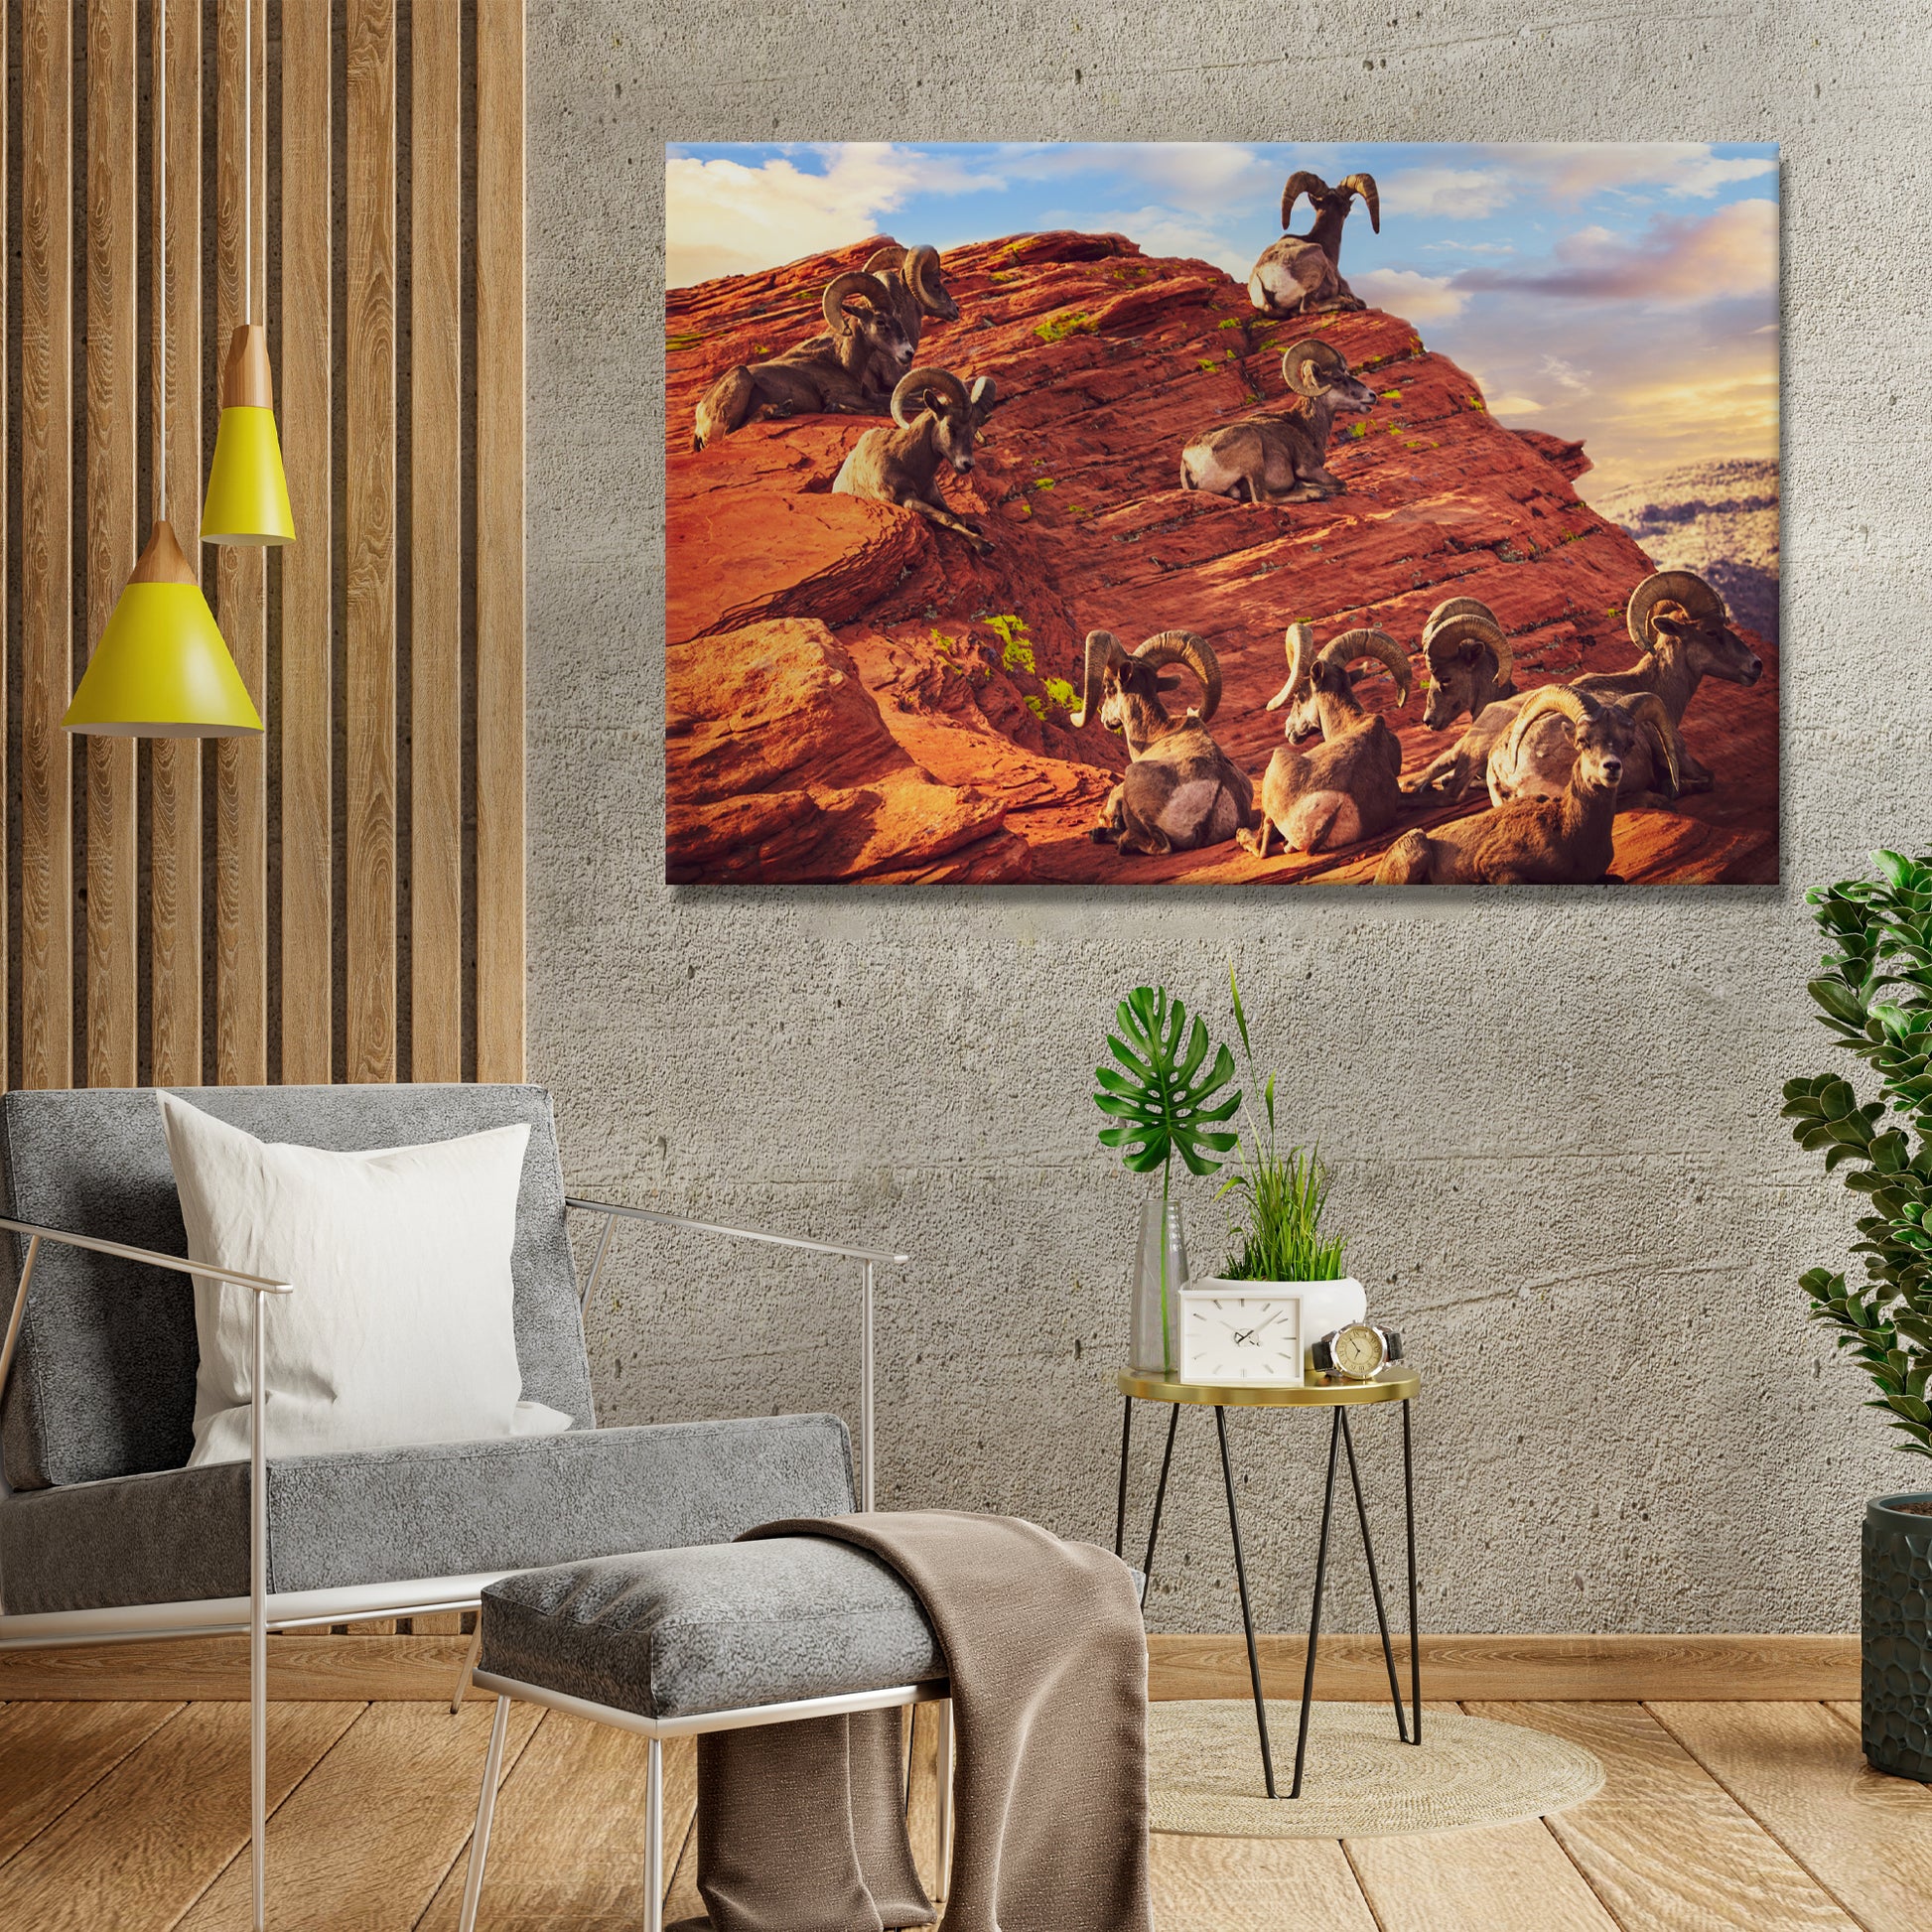 Big Horn Sheep Landscape Canvas Wall Art Style 2 - Image by Tailored Canvases